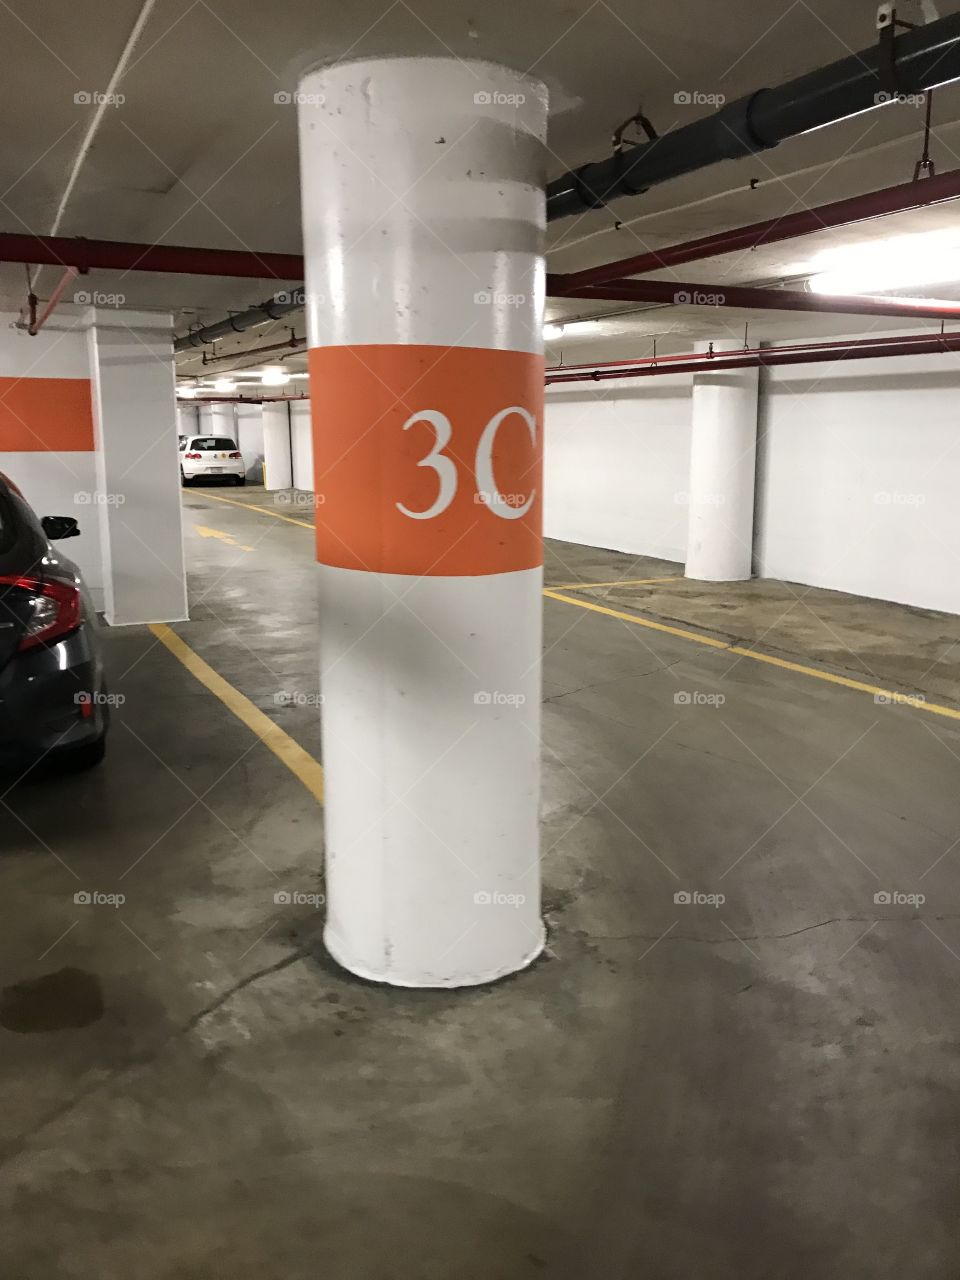 An empty underground parking lot with pillars and a big 3c sign on a support pole